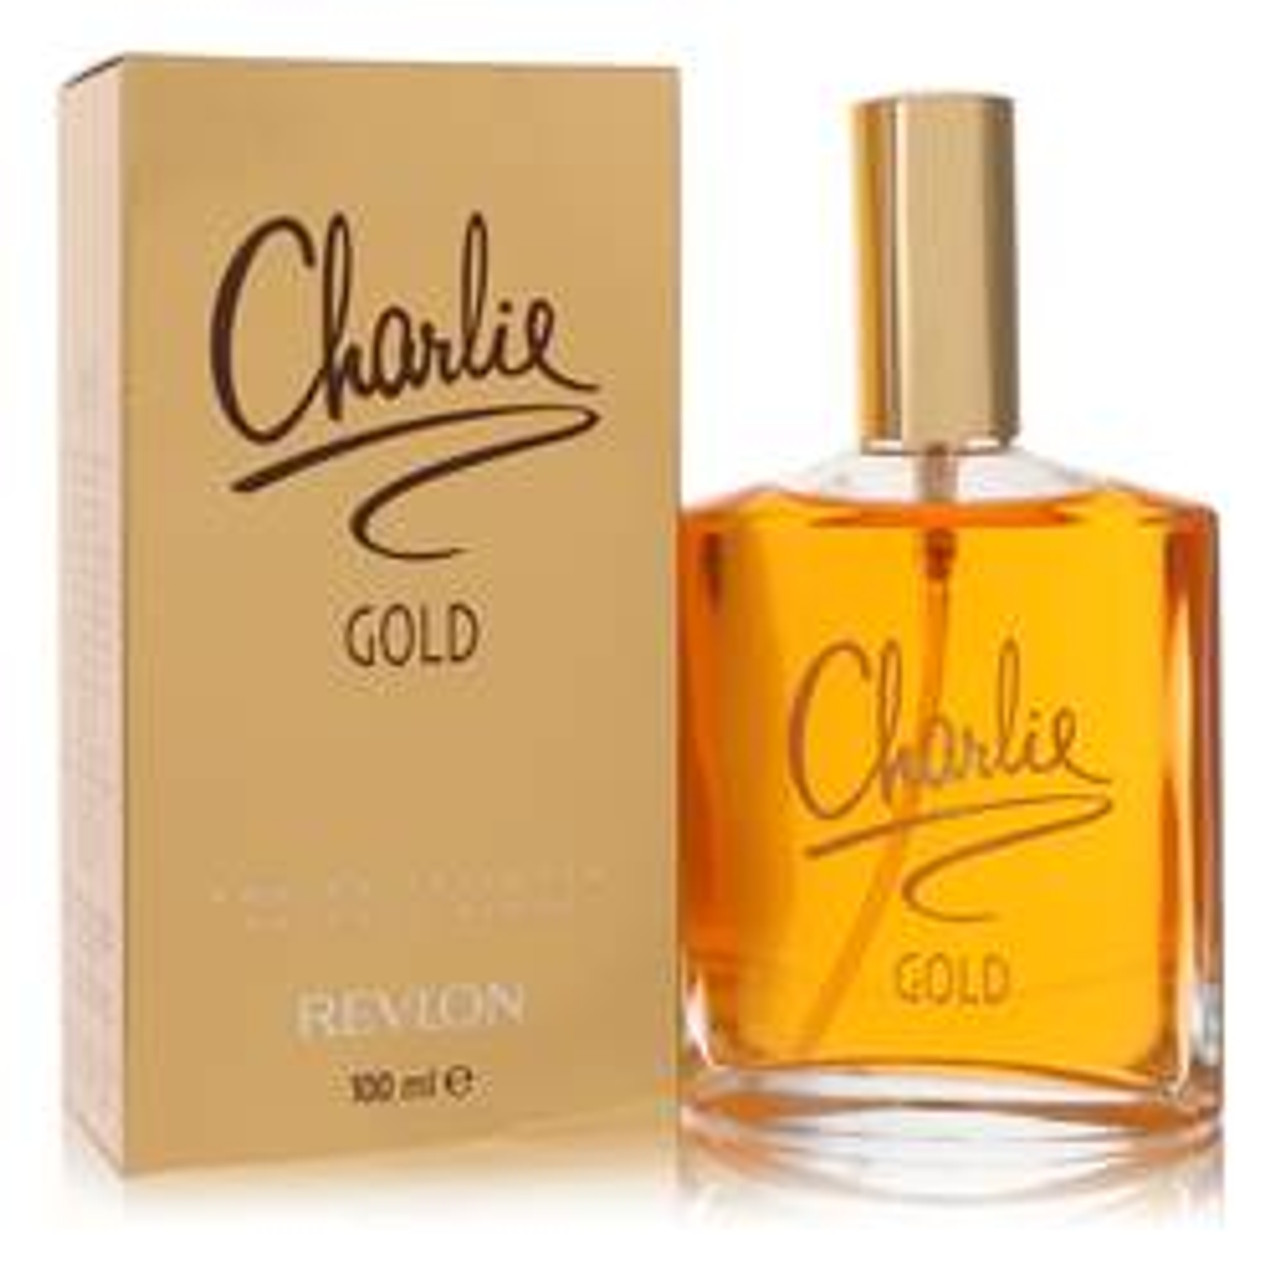 Charlie Gold Perfume By Revlon Eau De Toilette Spray 3.3 oz for Women - [From 27.00 - Choose pk Qty ] - *Ships from Miami